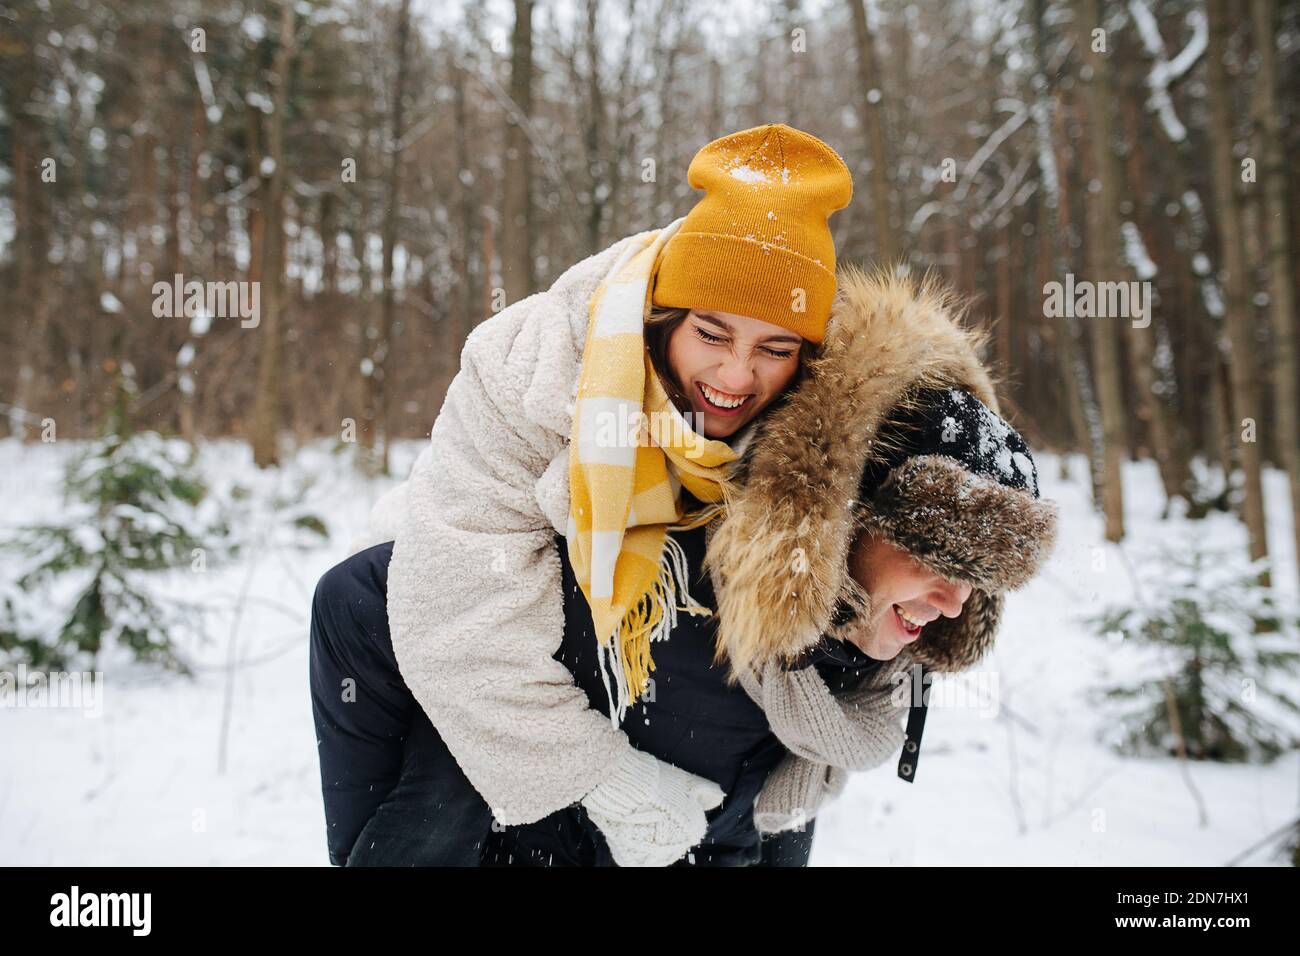 Family couple having fun in the winter forest Stock Photo